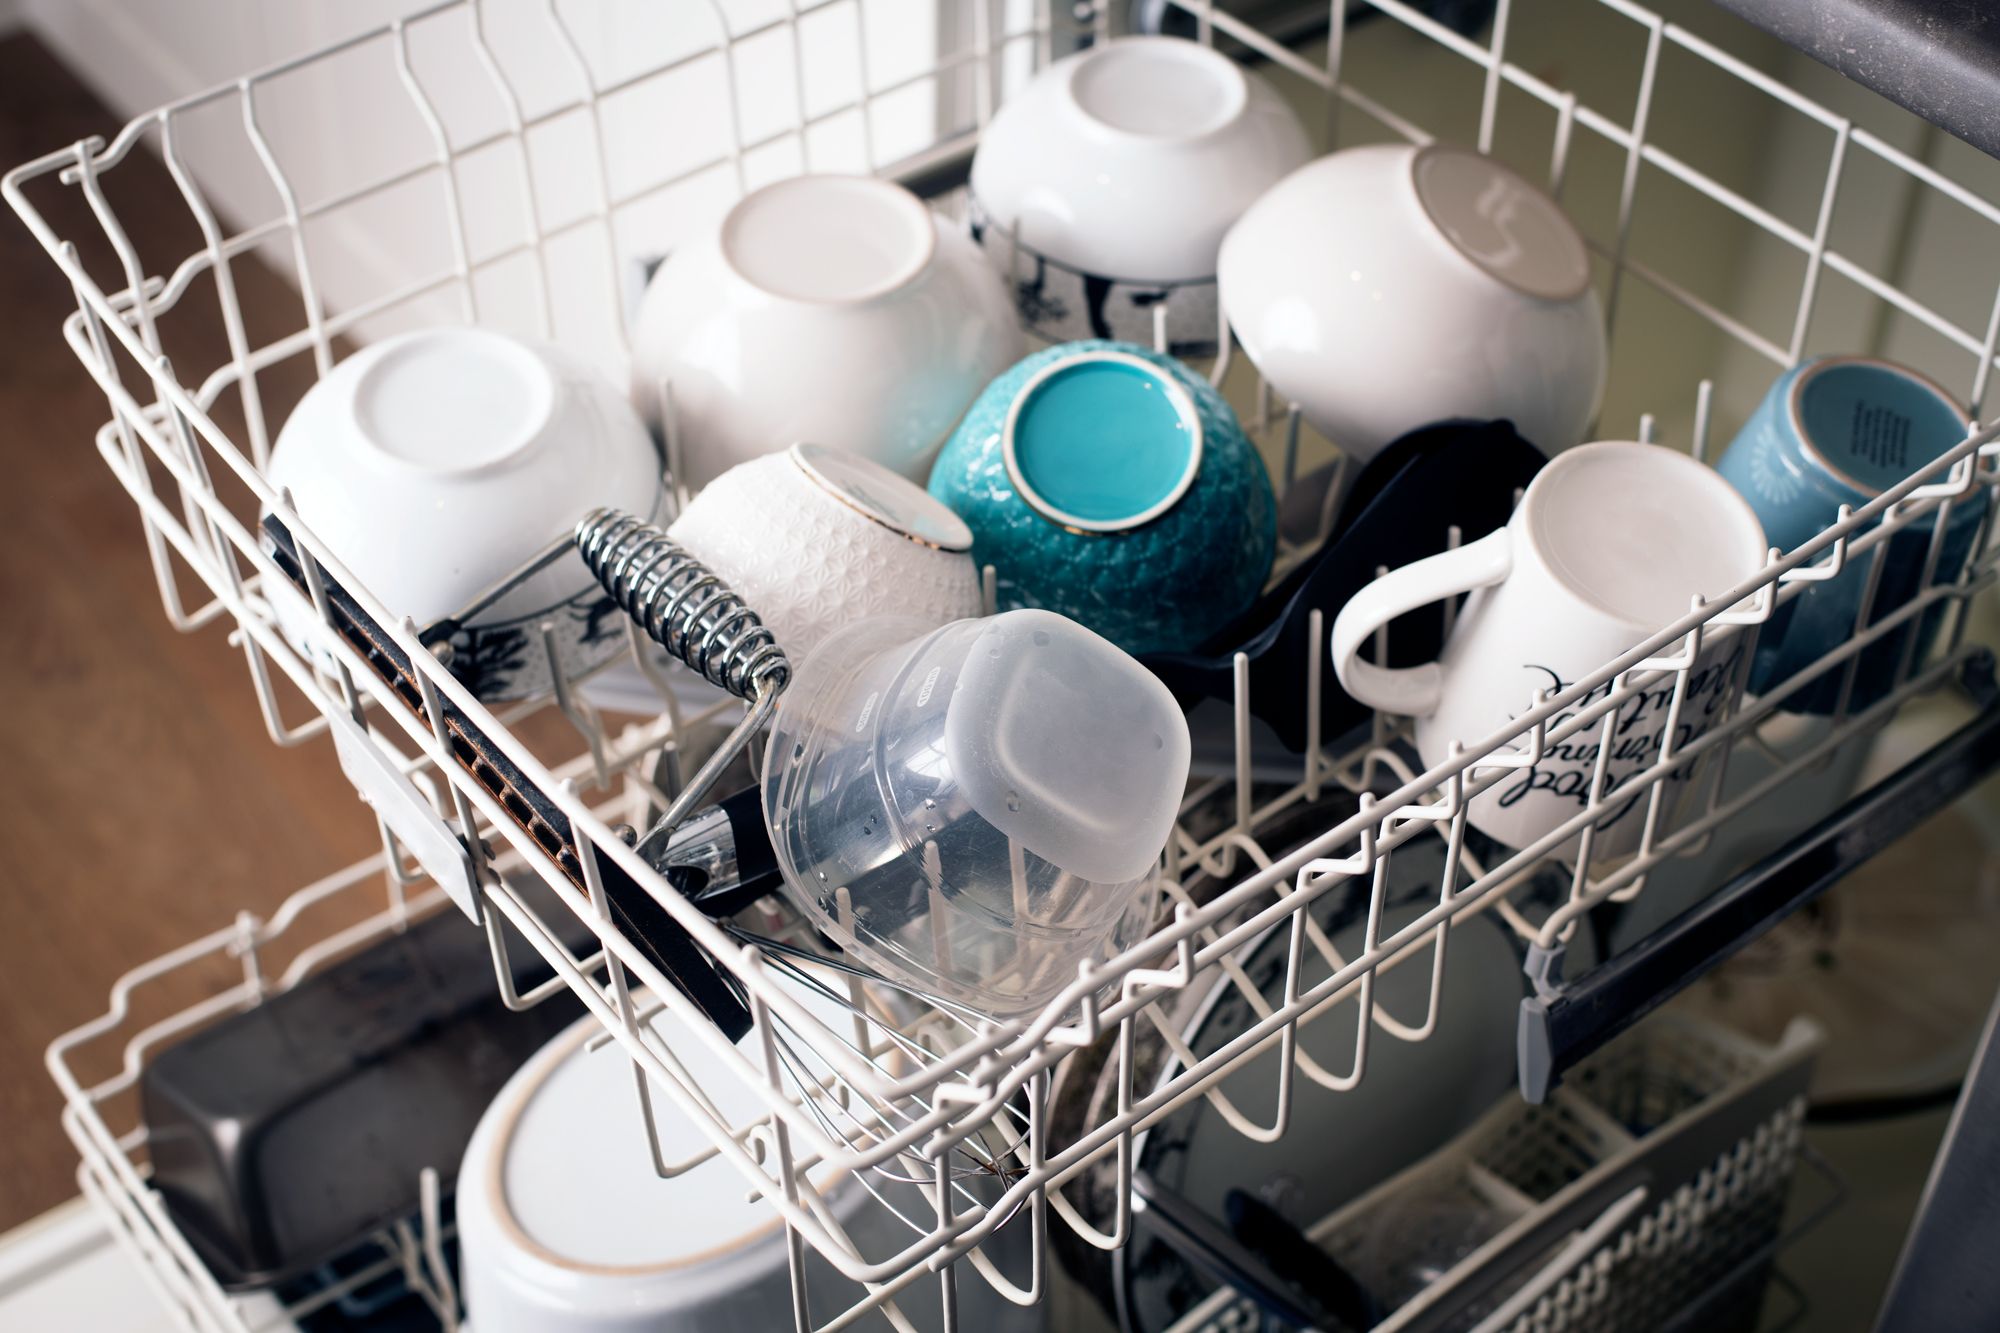 How To Load The Dishwasher